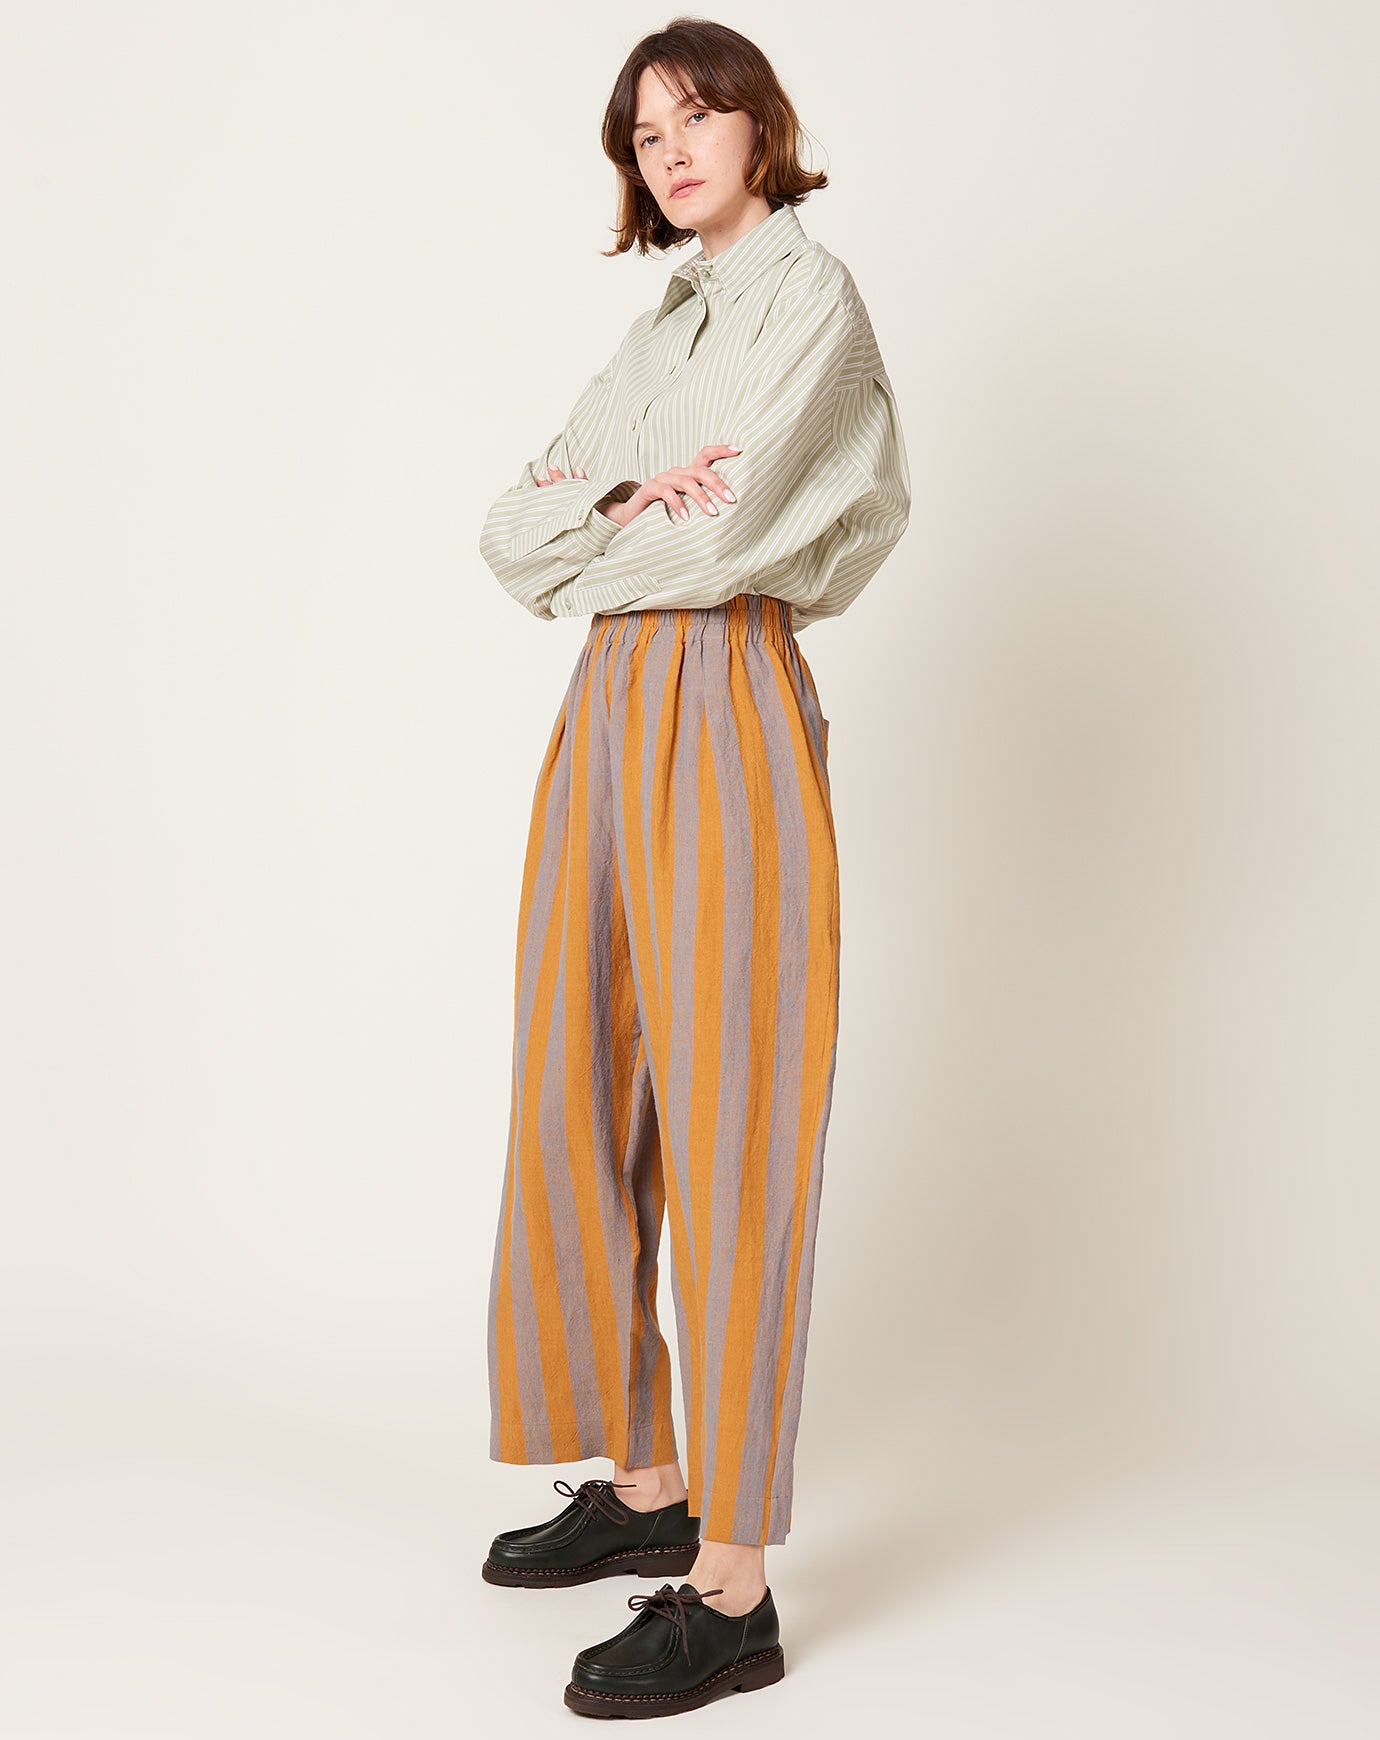 Cawley Luna Trousers in Bronze & Jeans